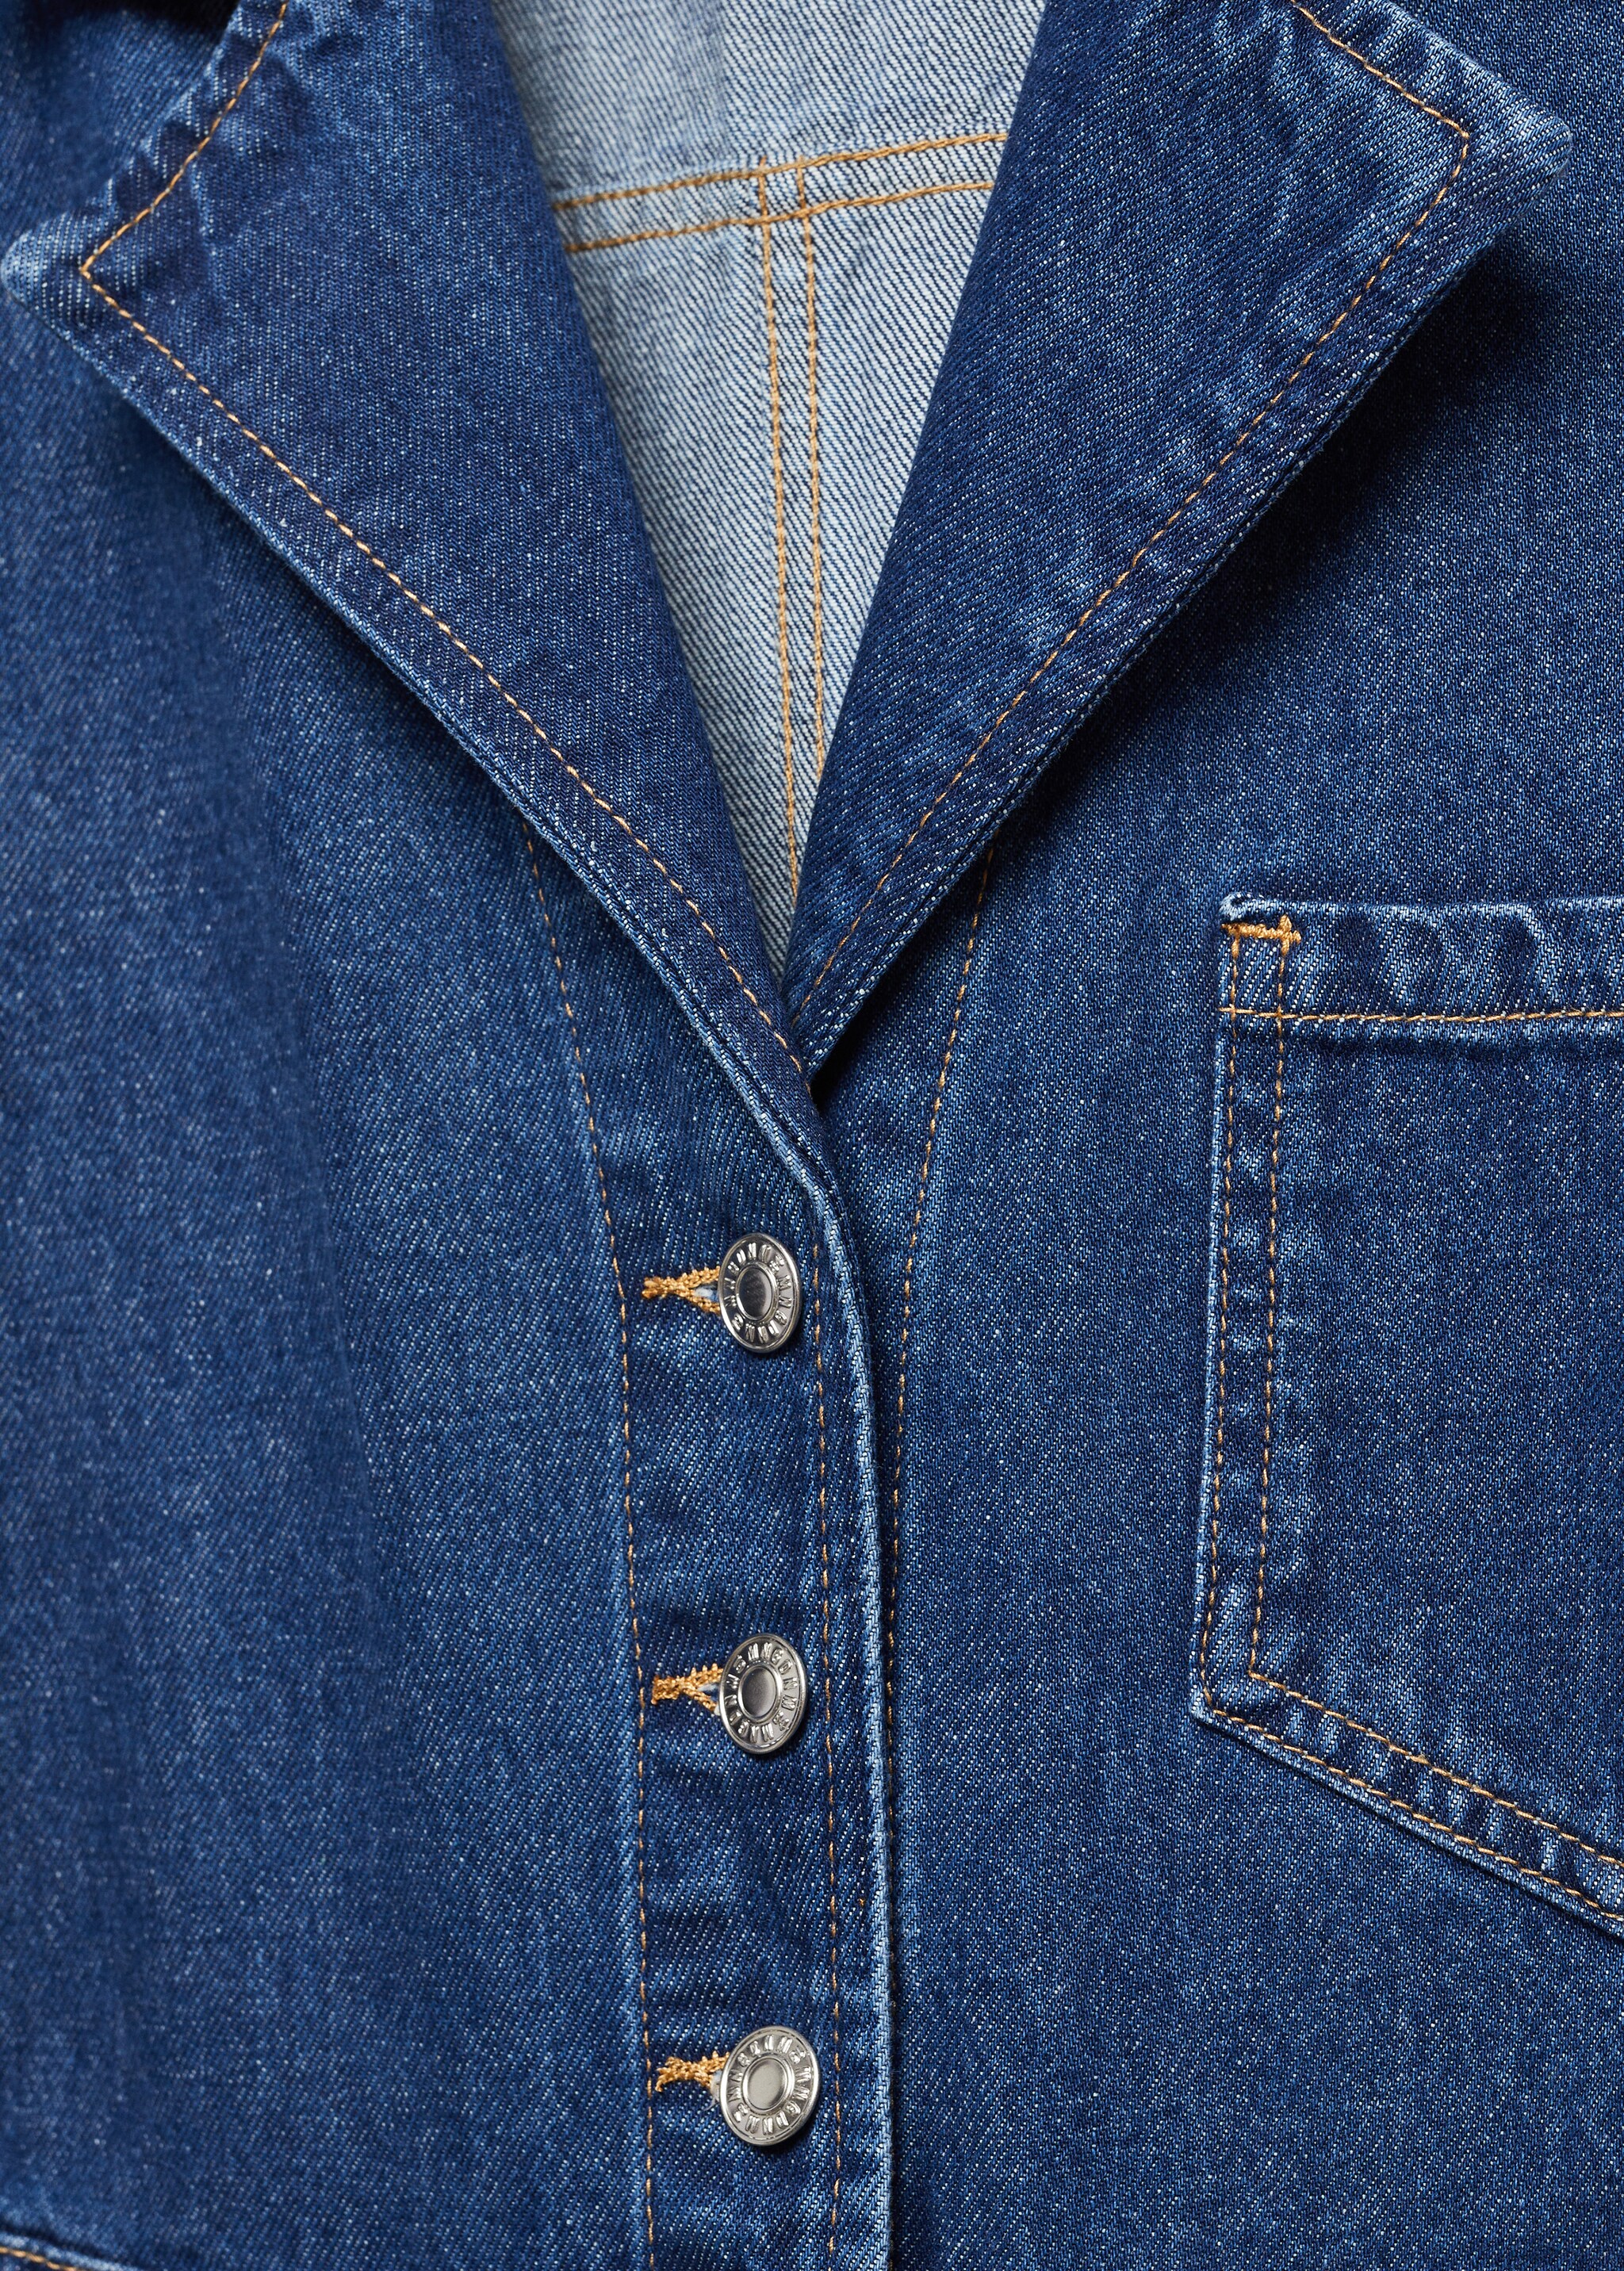 Denim jumpsuit with flaps - Details of the article 8